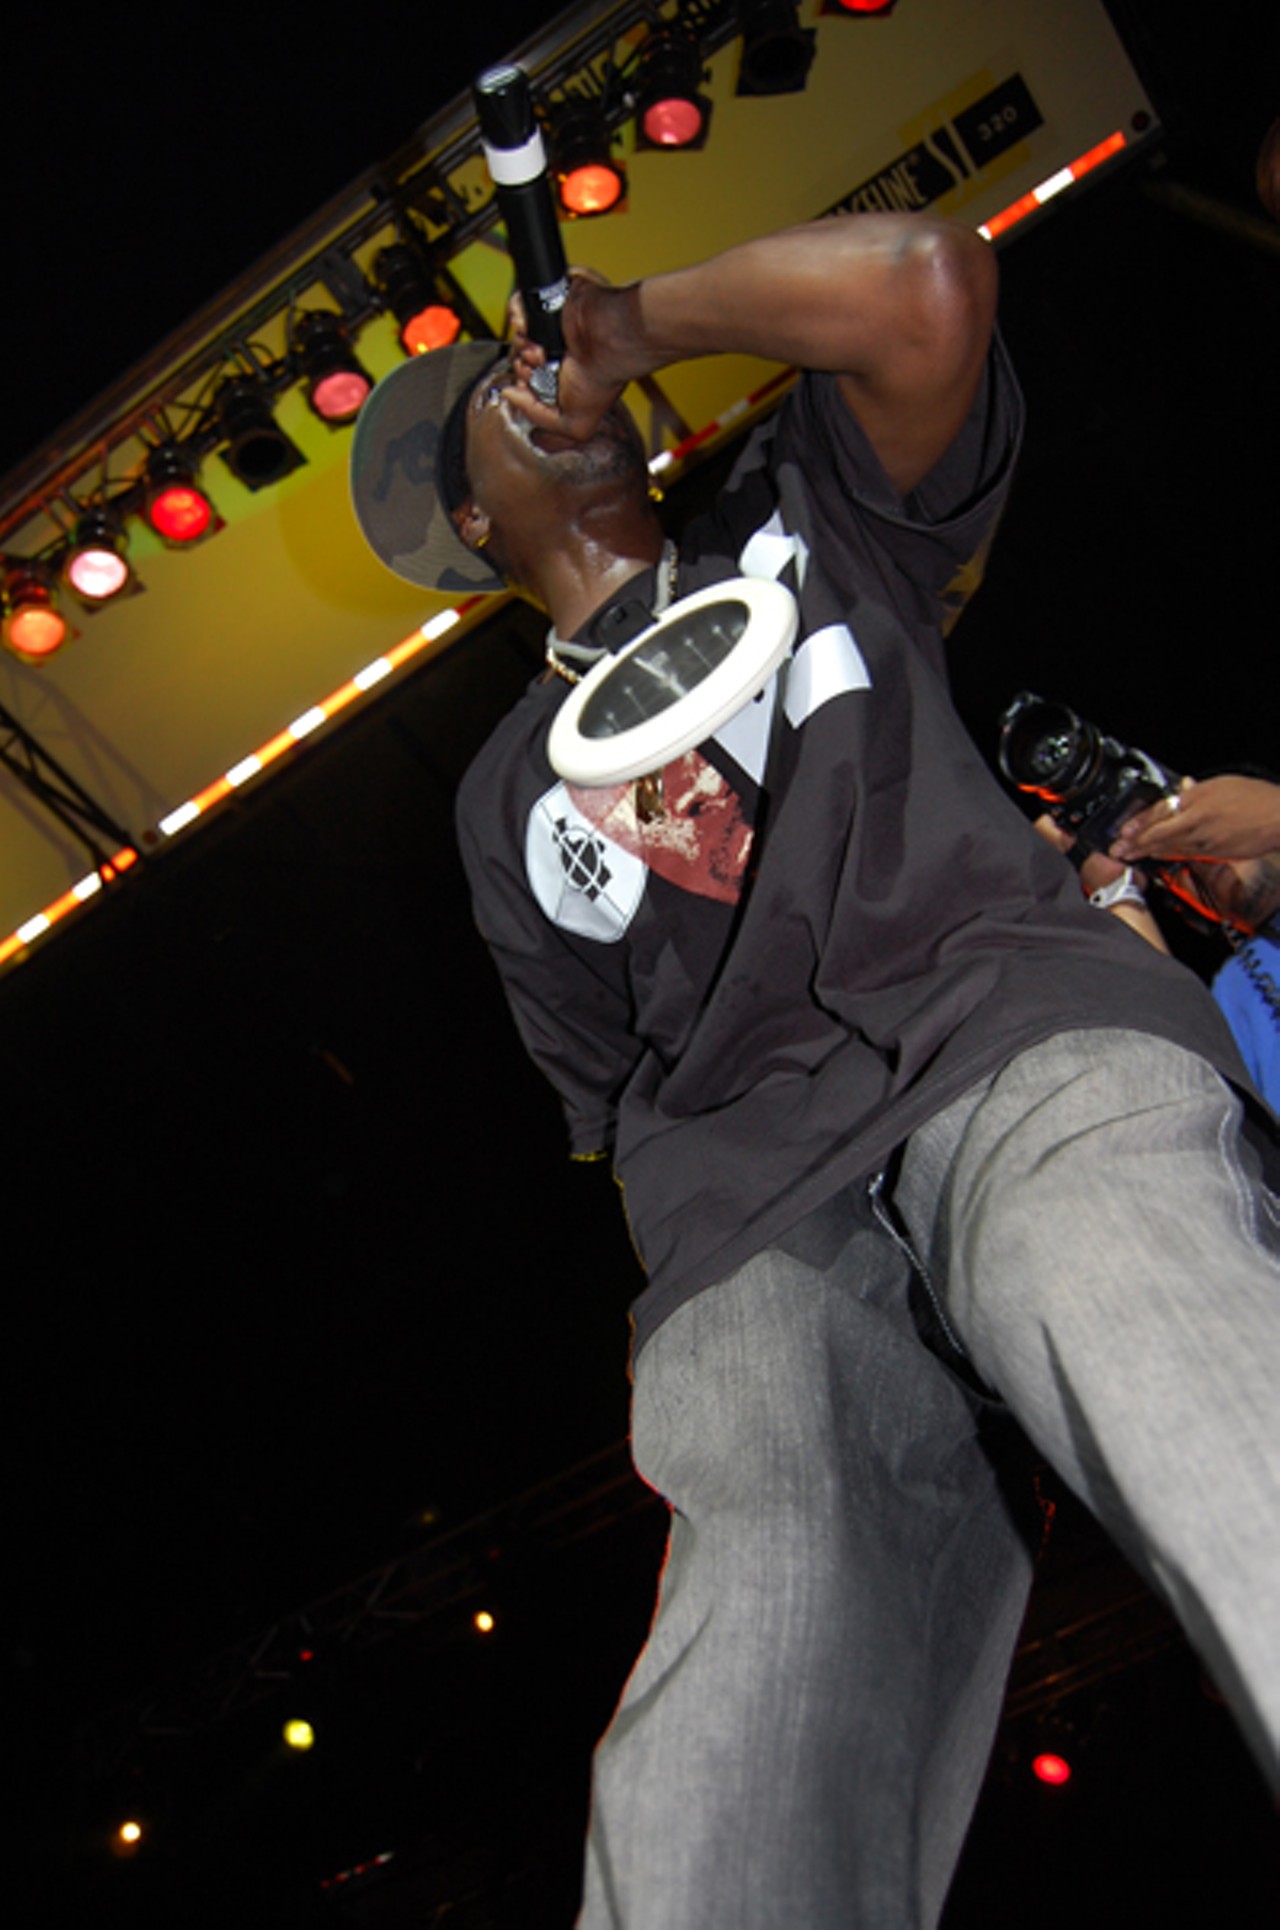 Flavor Flav performs during Public Enemy's set on Friday, July 18, 2008 at Chicago's Pitchfork Music Festival.